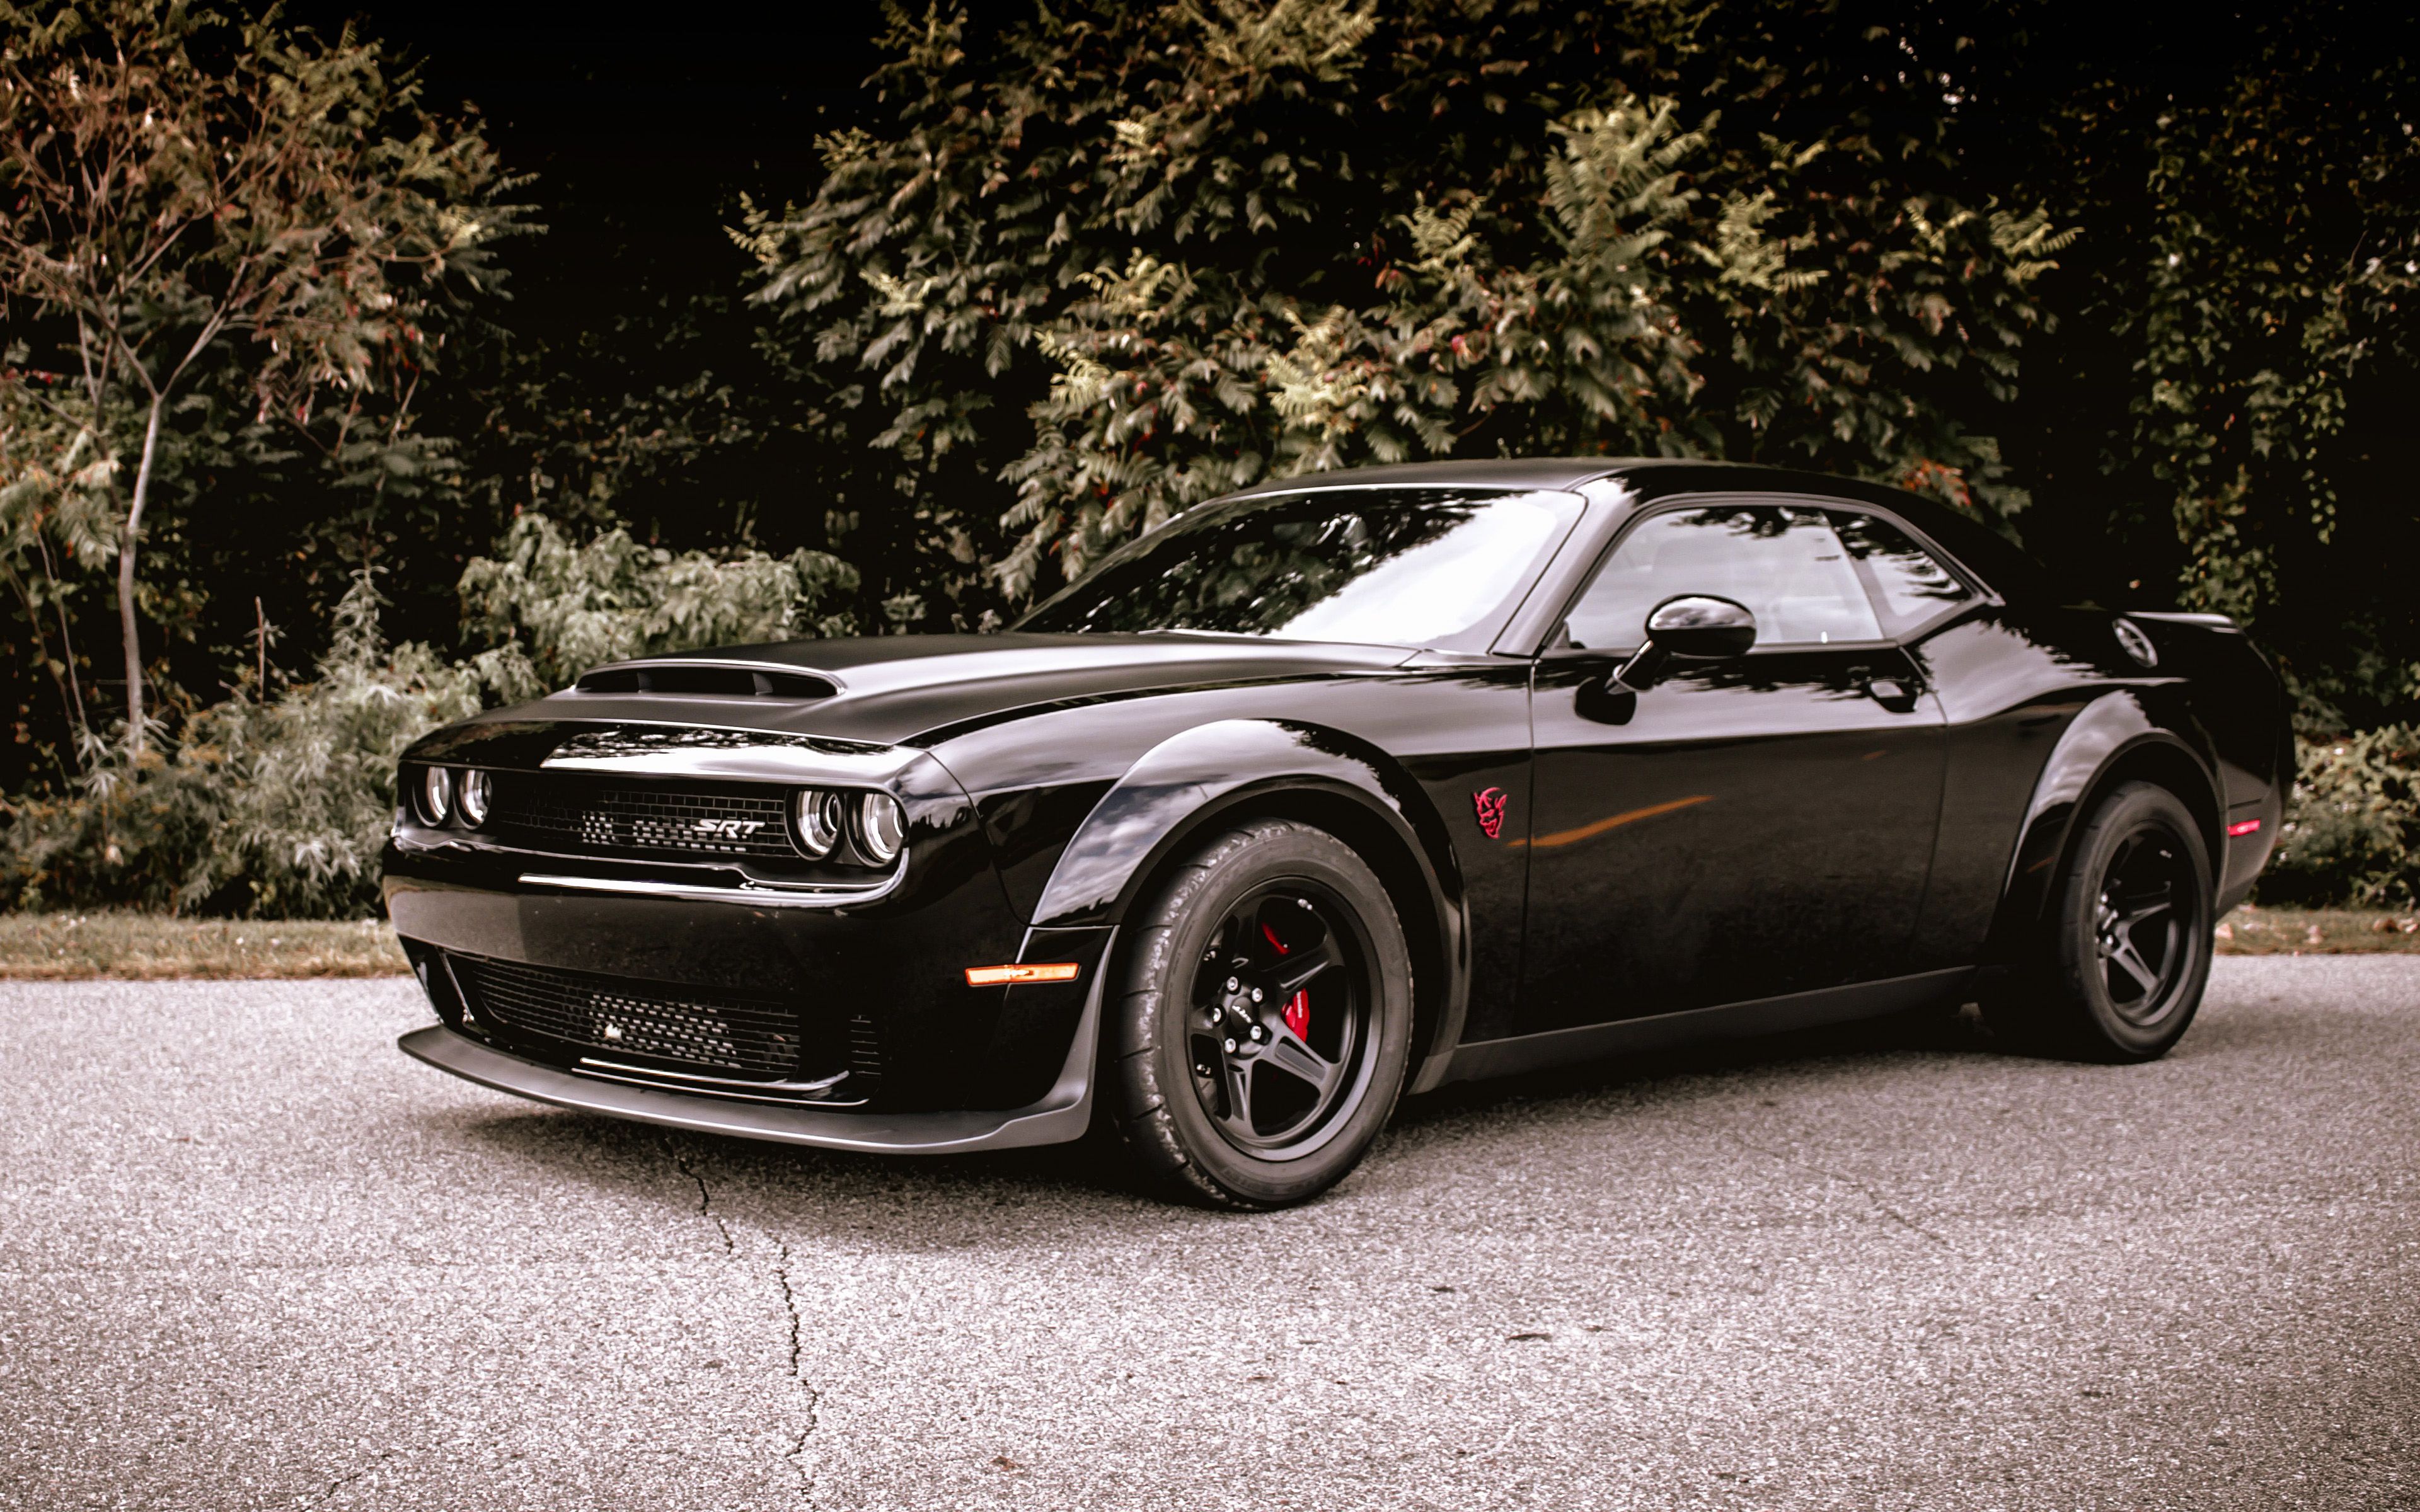 3840x2400 Download Wallpaper Dodge Challenger Srt Demon 2022 Sports Coupe Black Challenger Srt American Cars Usa Dodge For Desktop With Resolution 3840x2400 High Quality Hd Picture Wallpaper